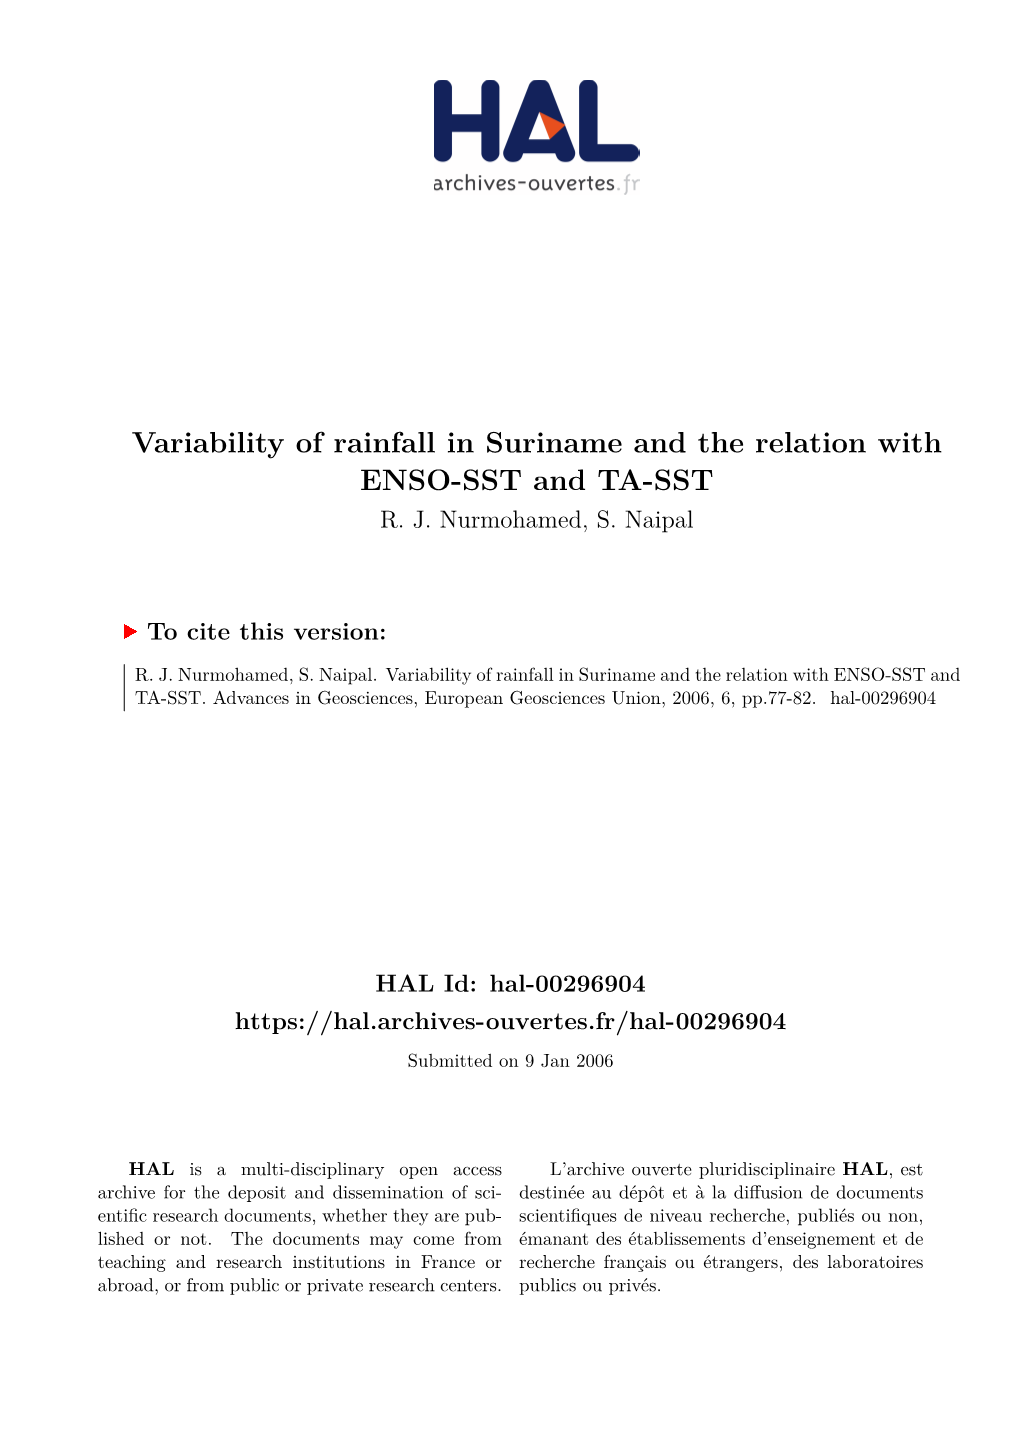 Variability of Rainfall in Suriname and the Relation with ENSO-SST and TA-SST R